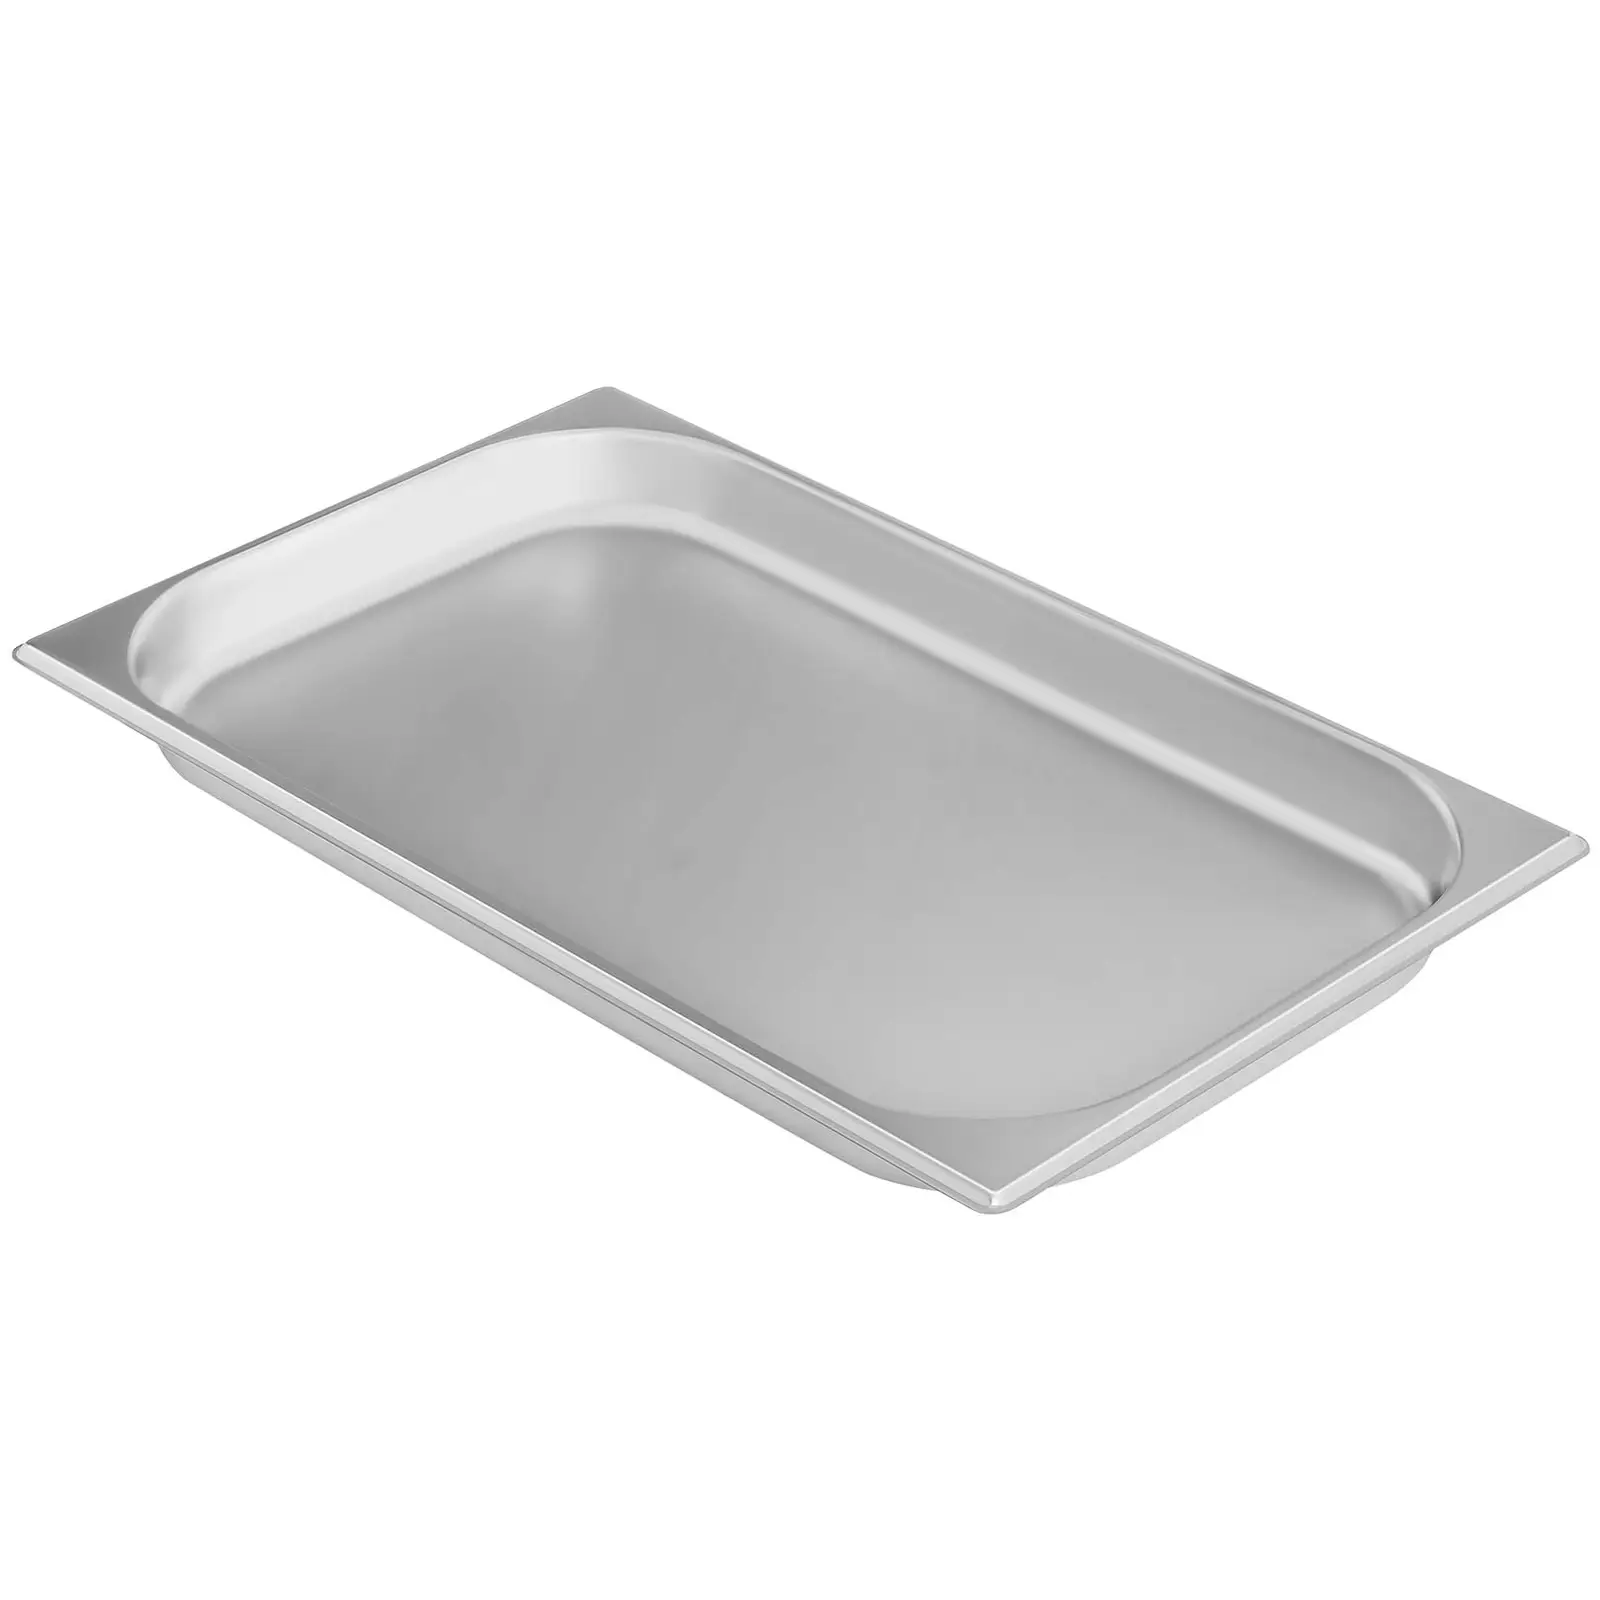 Gastronorm Tray - 1/1 - 40 mm